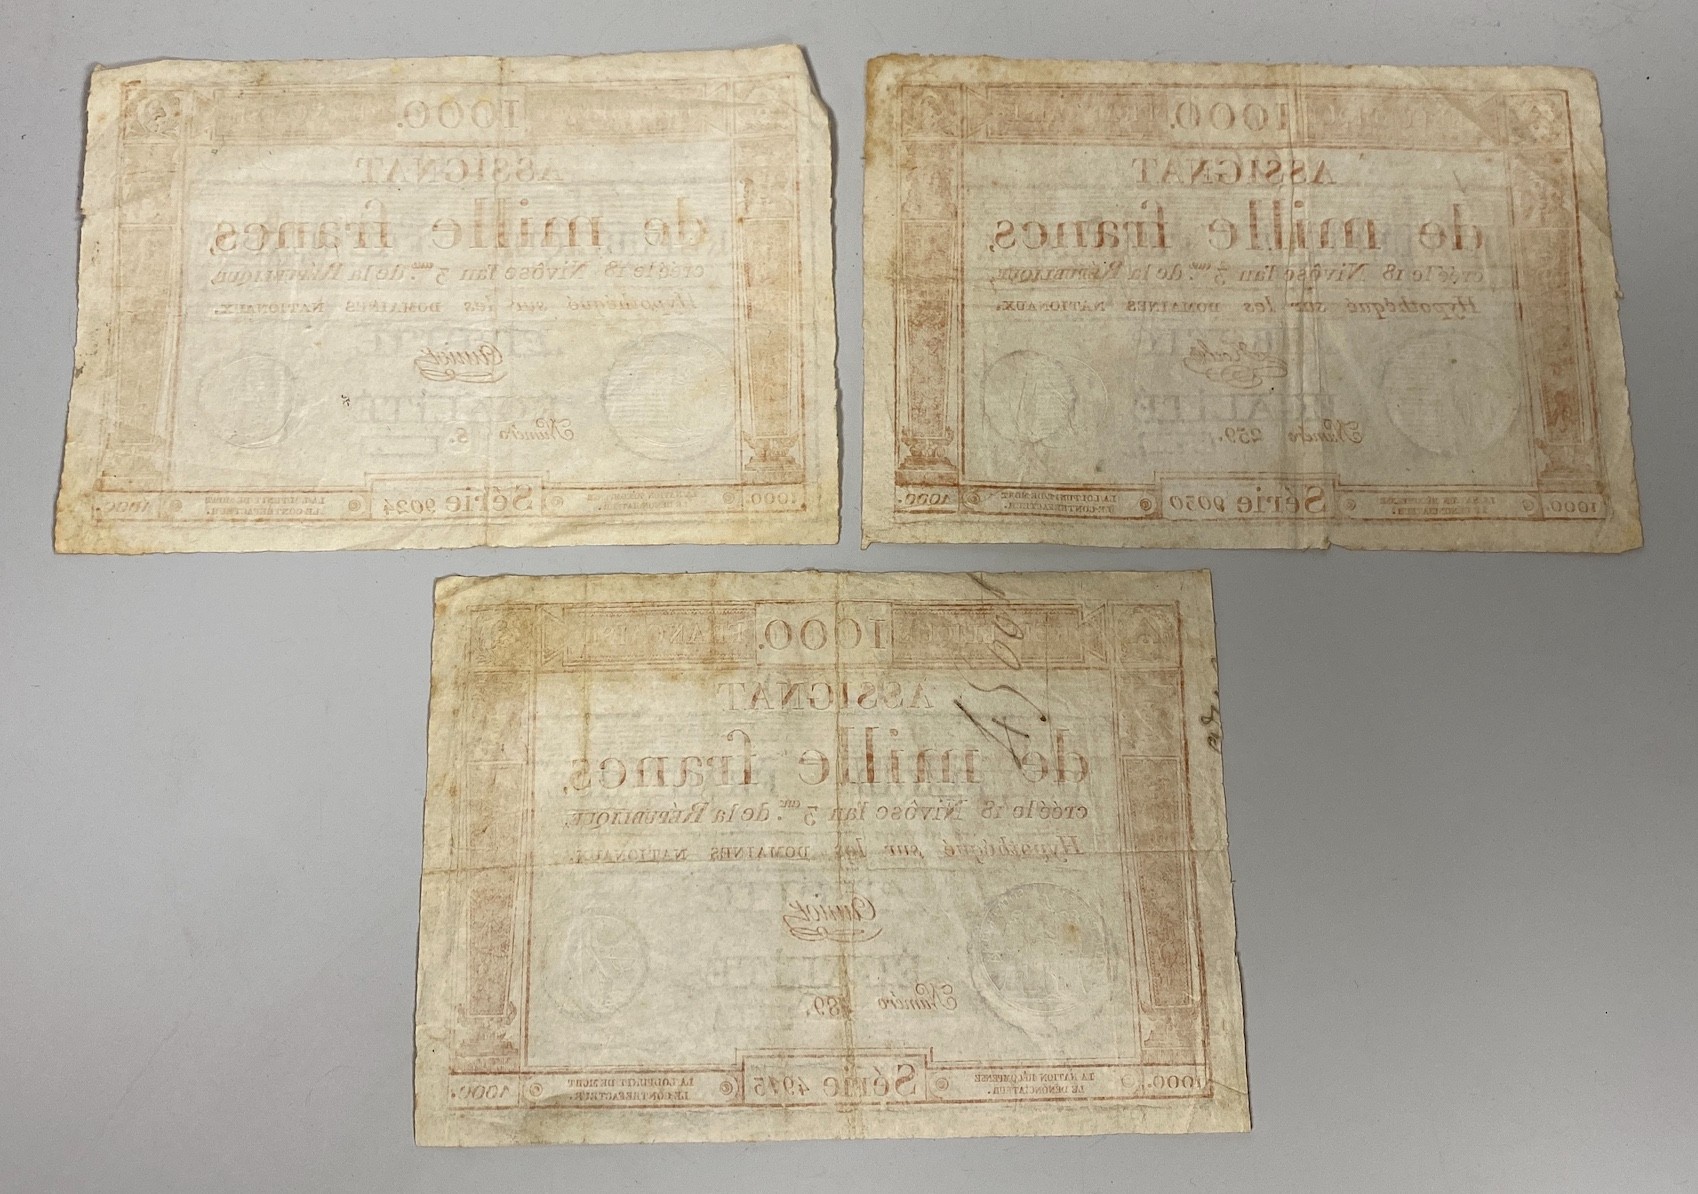 French Revolutionary banknotes, Republic Francaise, three Assignat de mille francs 1000 Francs 18 Nivose An III - 1795, Serie 9024, Numero 8, Serie 9030, Numero 259 and Serie 4913, Numero 489, watermarks (3)